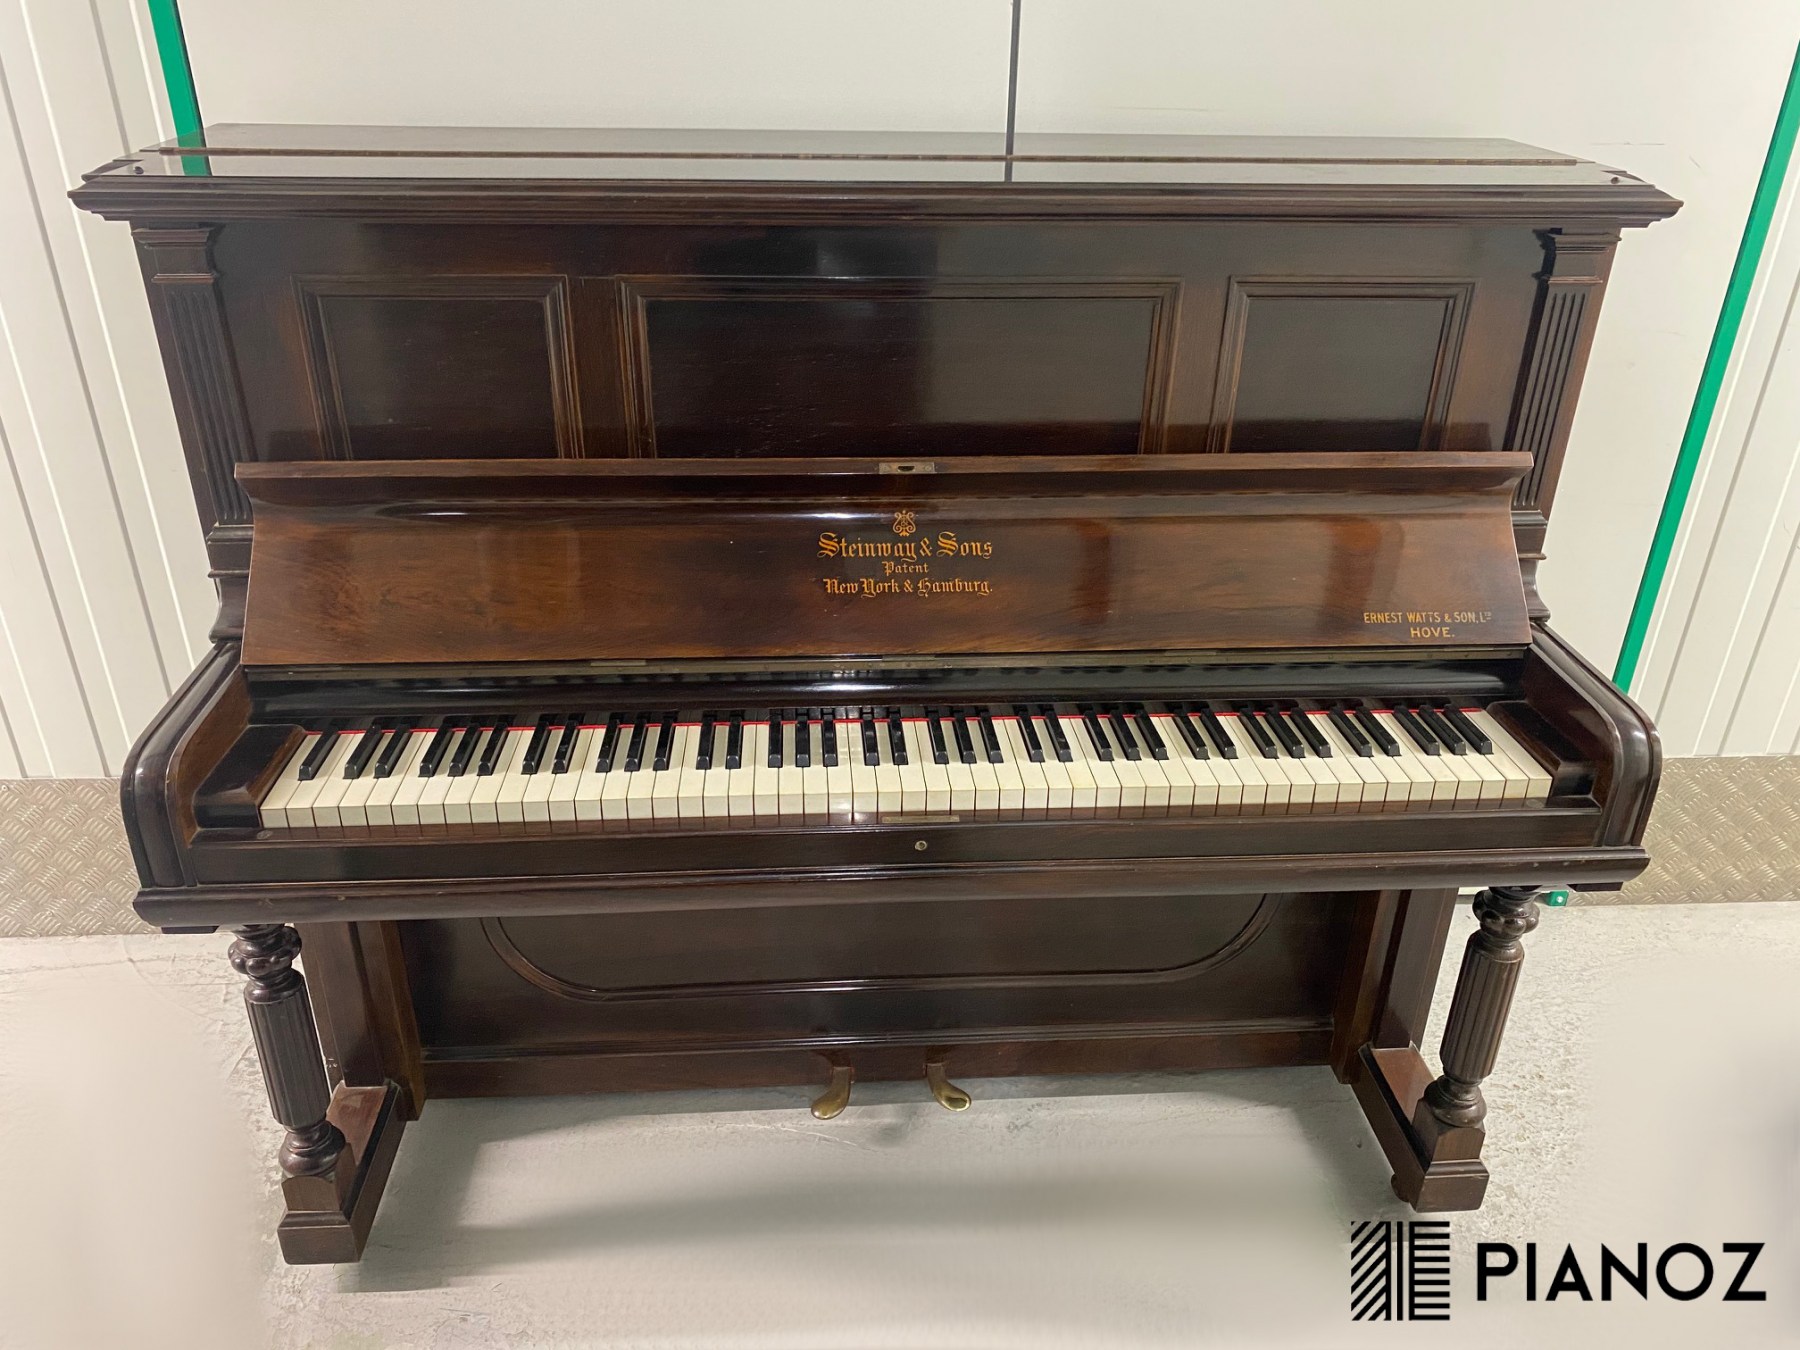 Steinway & Sons Model E Upright Piano piano for sale in UK